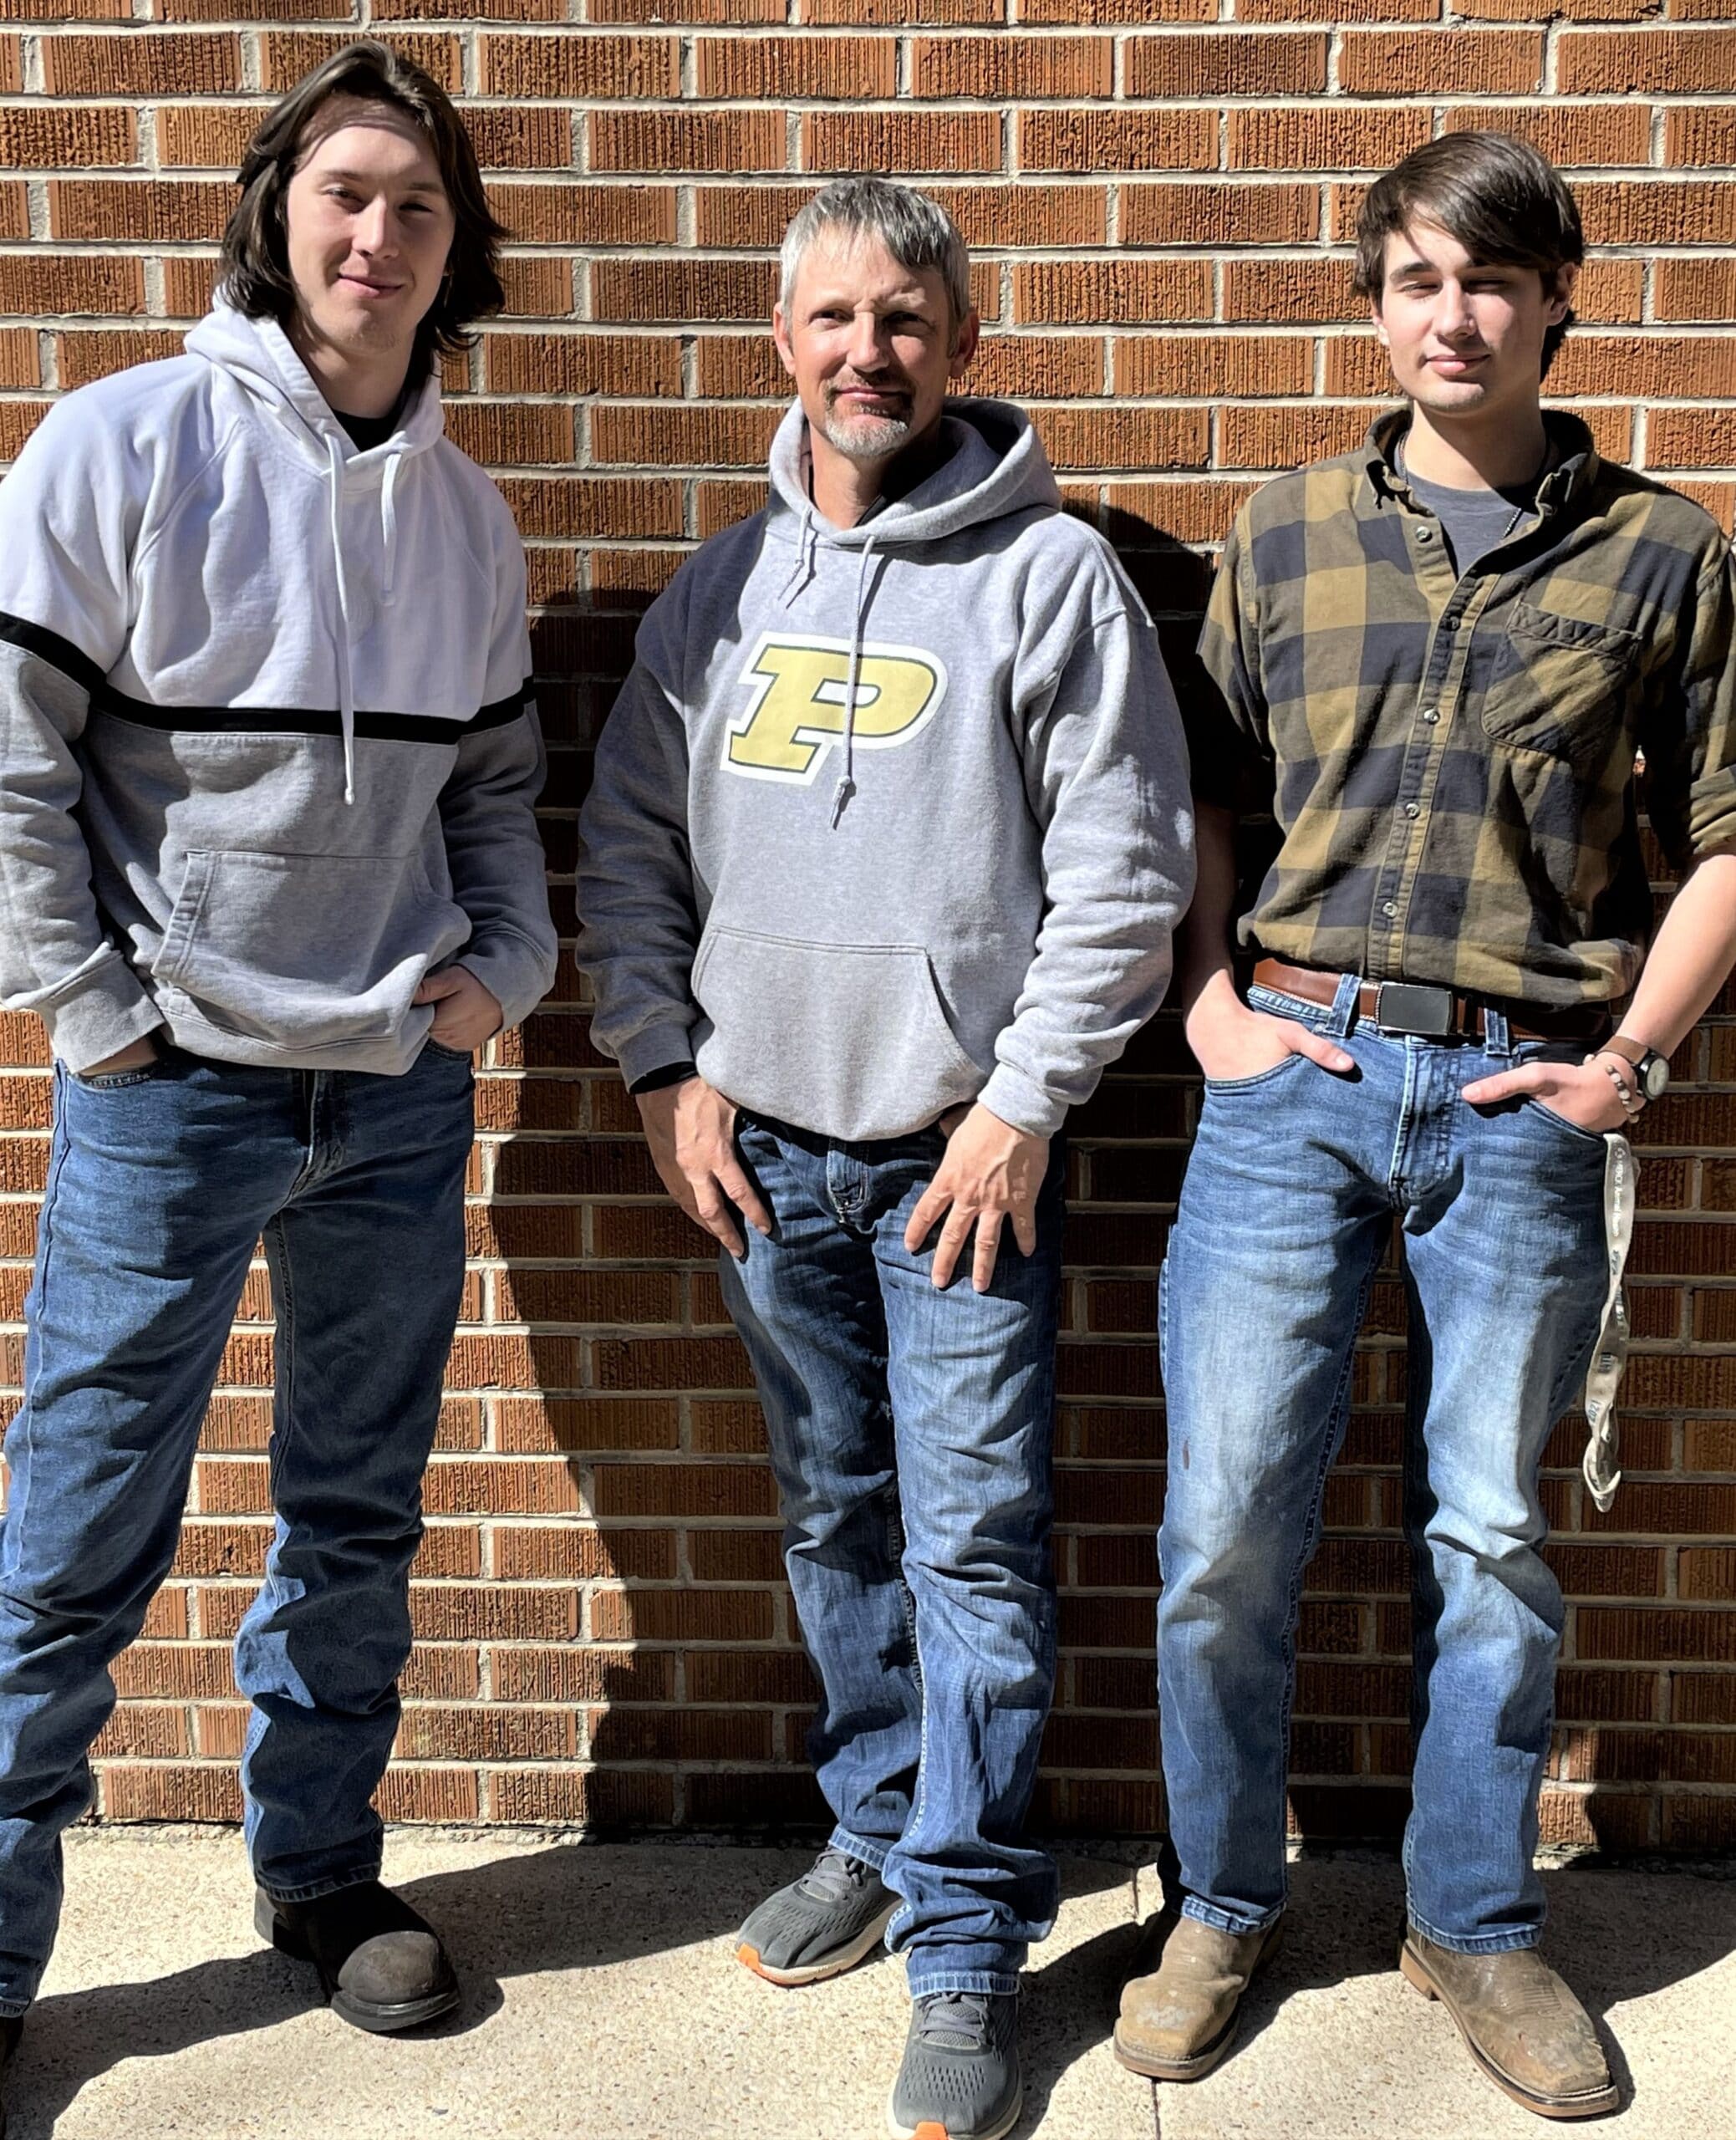 Pearl River Community College students Mitchell Greer (left) and Thomas Bush (right), pictured with instructor Robby Shaw